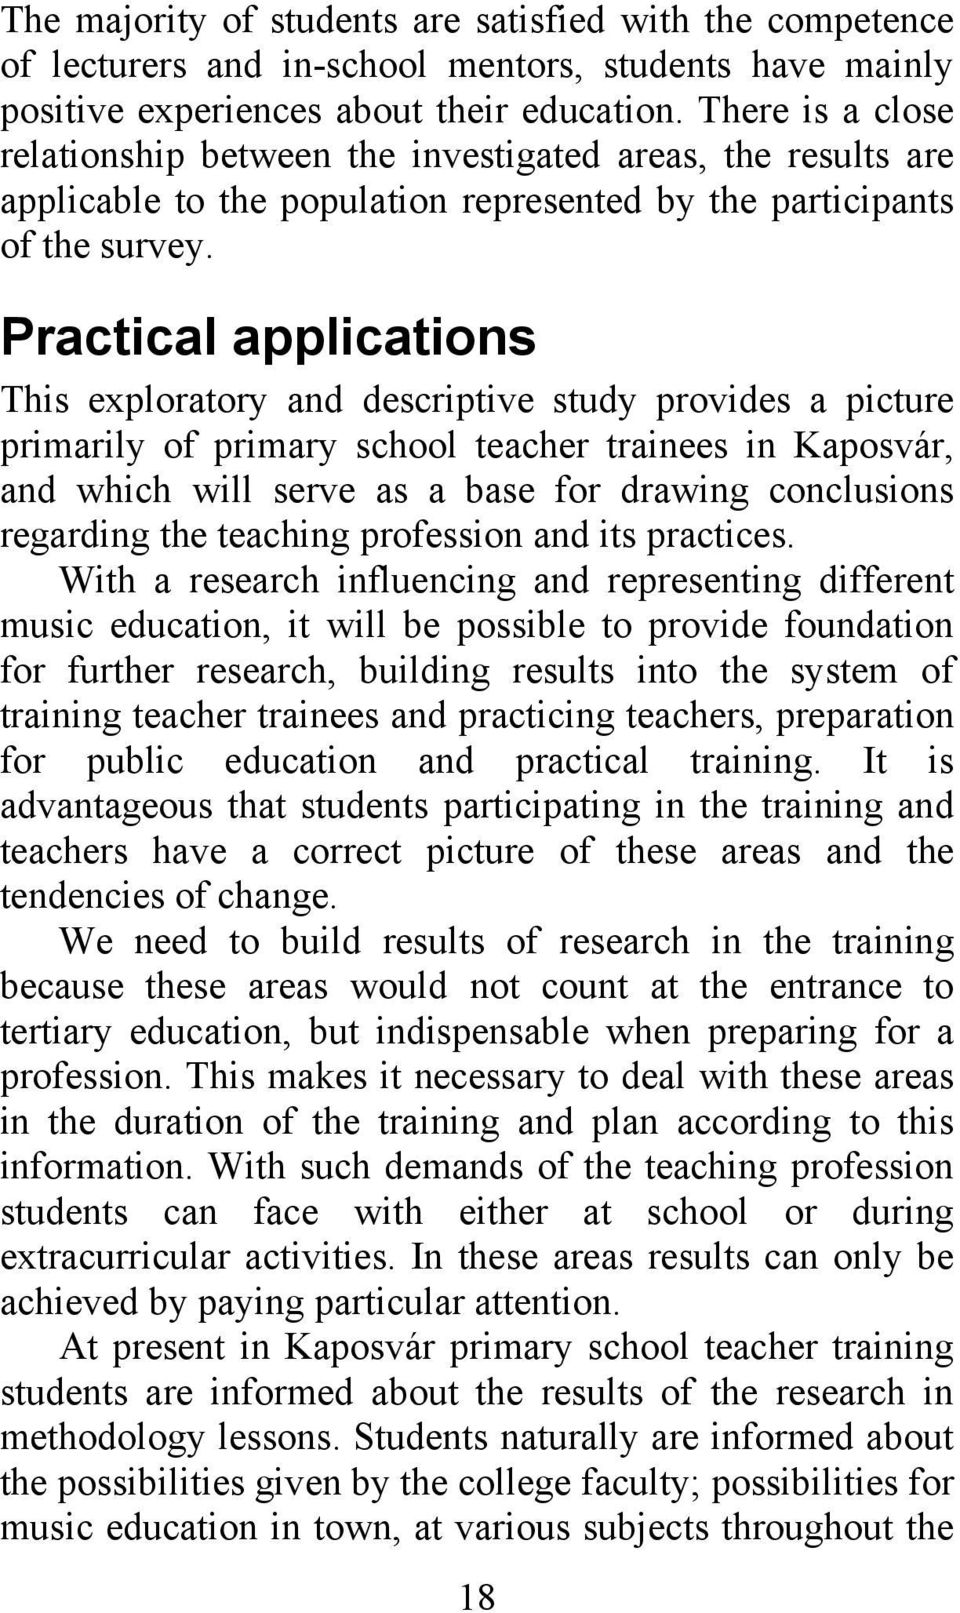 Practical applications This exploratory and descriptive study provides a picture primarily of primary school teacher trainees in Kaposvár, and which will serve as a base for drawing conclusions